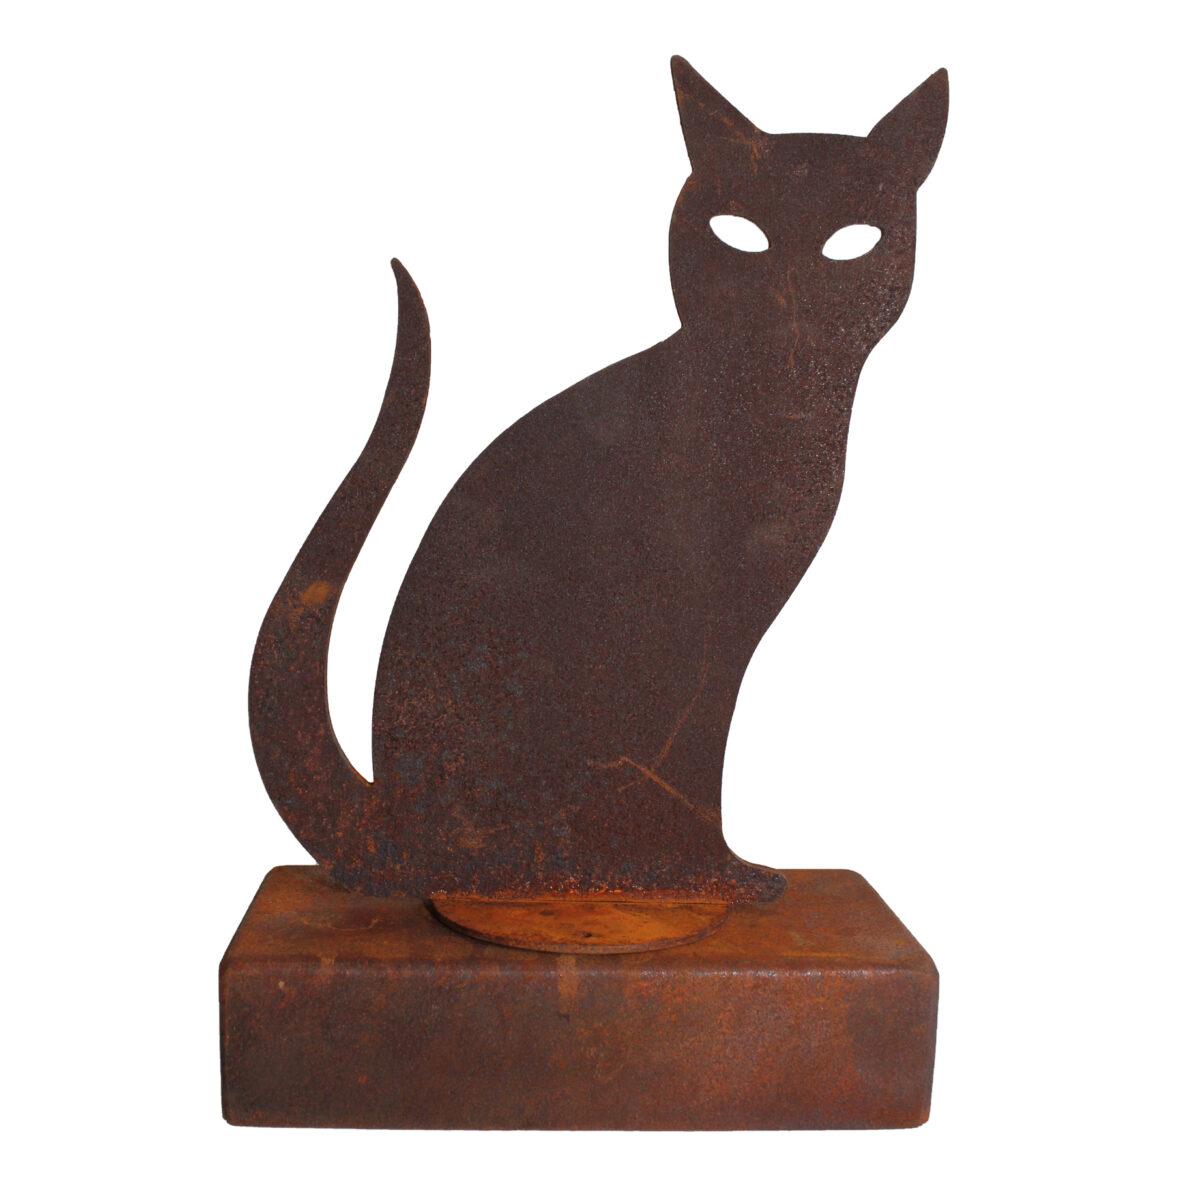 Pride – Cat - Urne - Sculpture by Chroessi Schnell